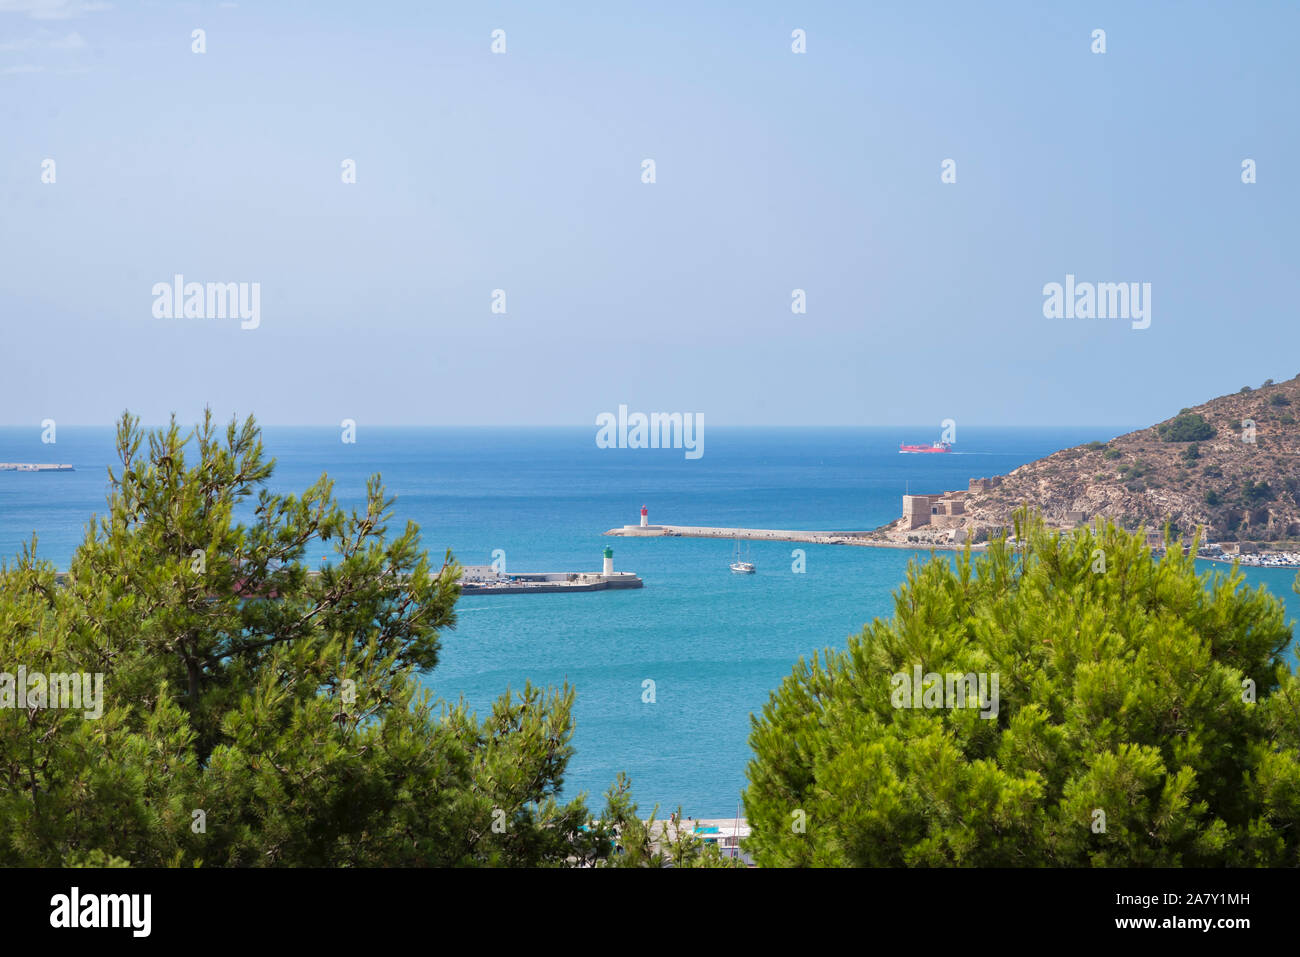 The harbour at Cartegena, Spain Stock Photo